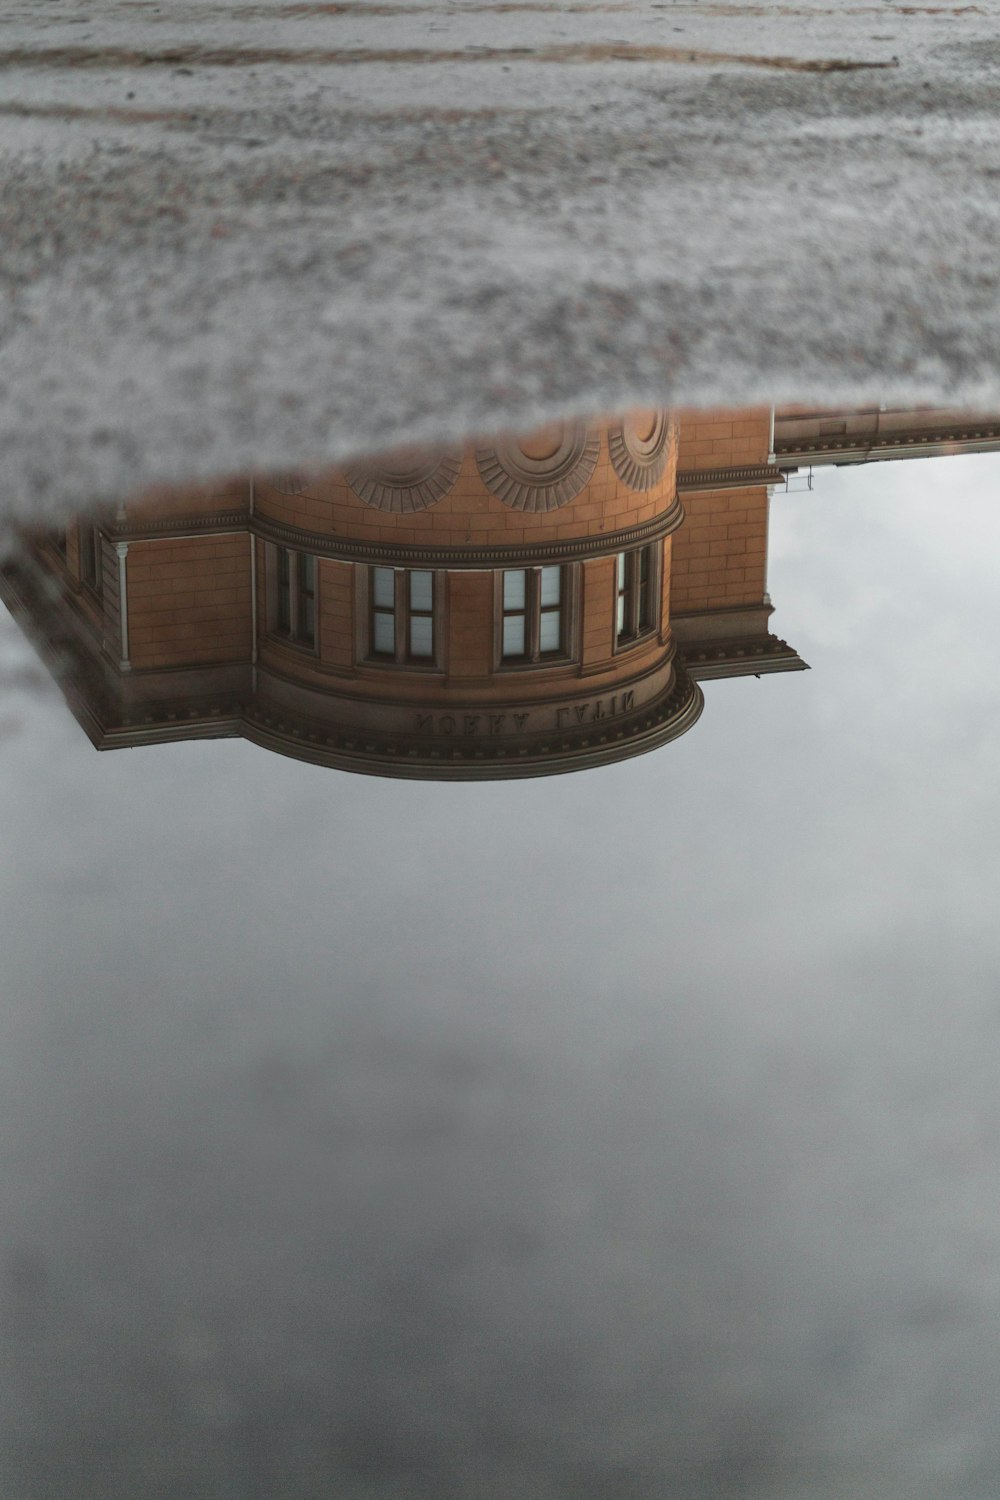 water mirror of brown commercial building